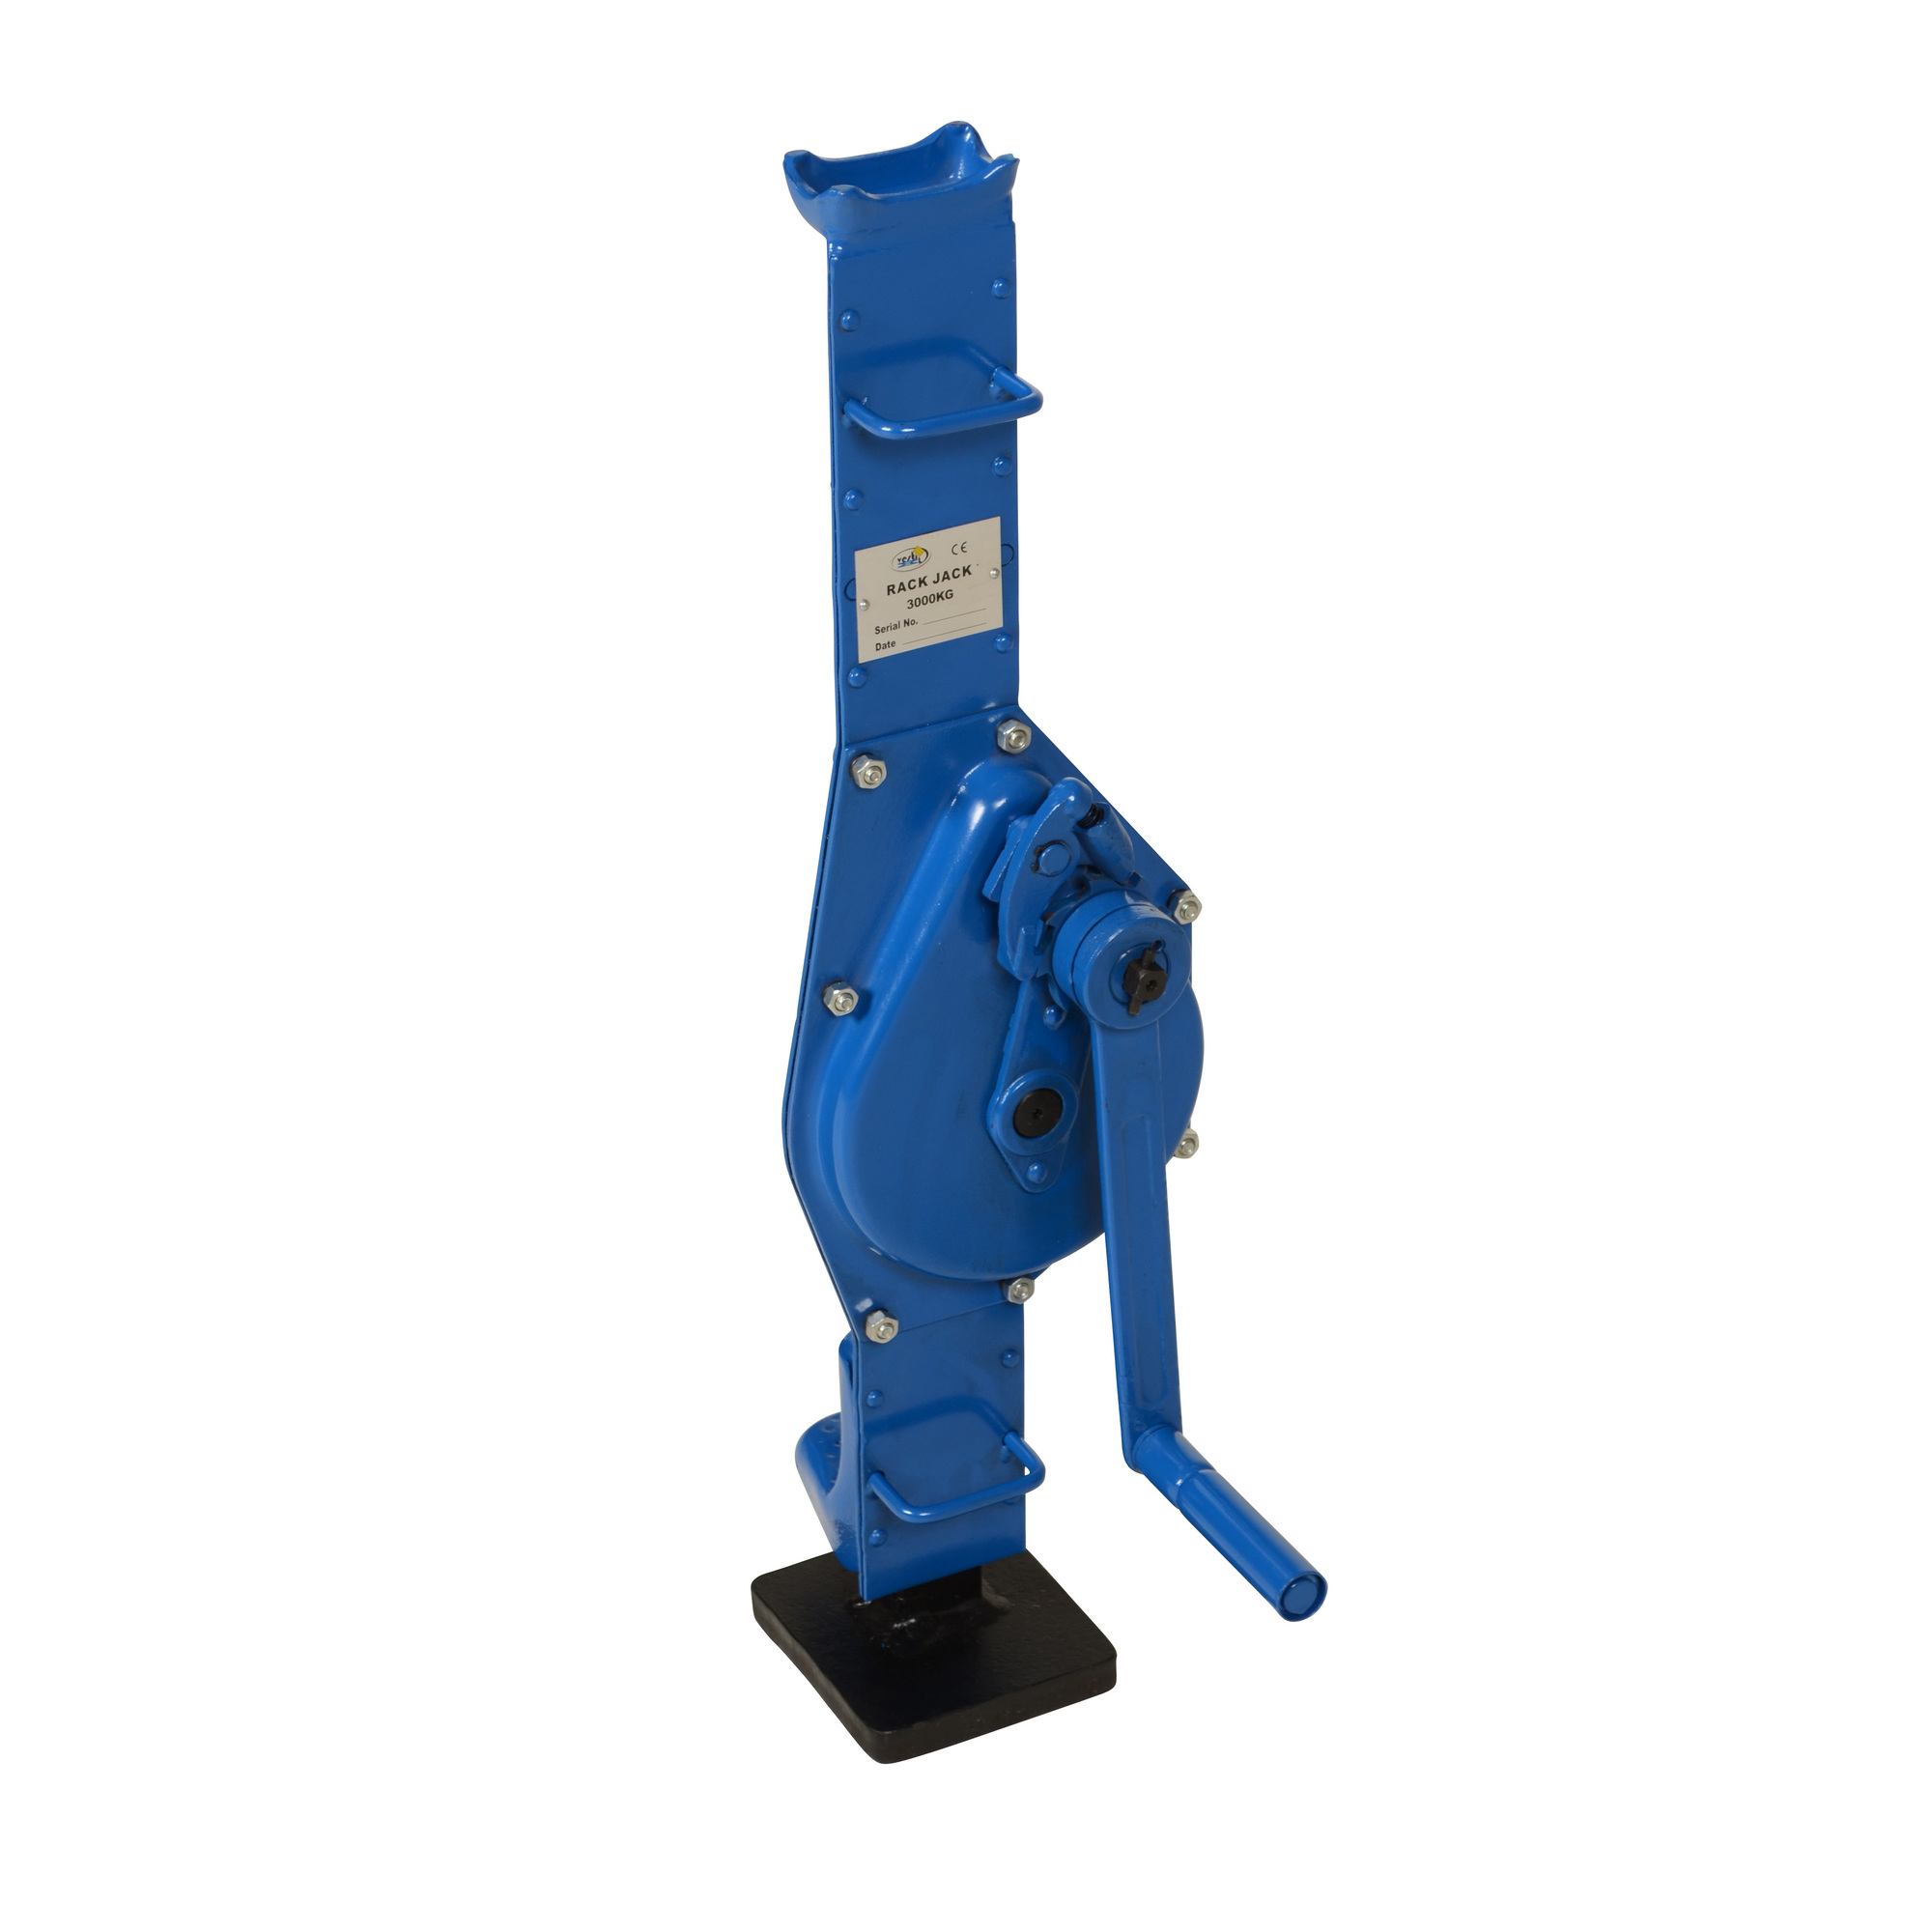 Vestil, Mechanical Machinery Jack 6k, Lift Capacity 3 Tons, MInch Lift Height 29 in, Max. Lift Height 42.938 in, Model MMJ-6